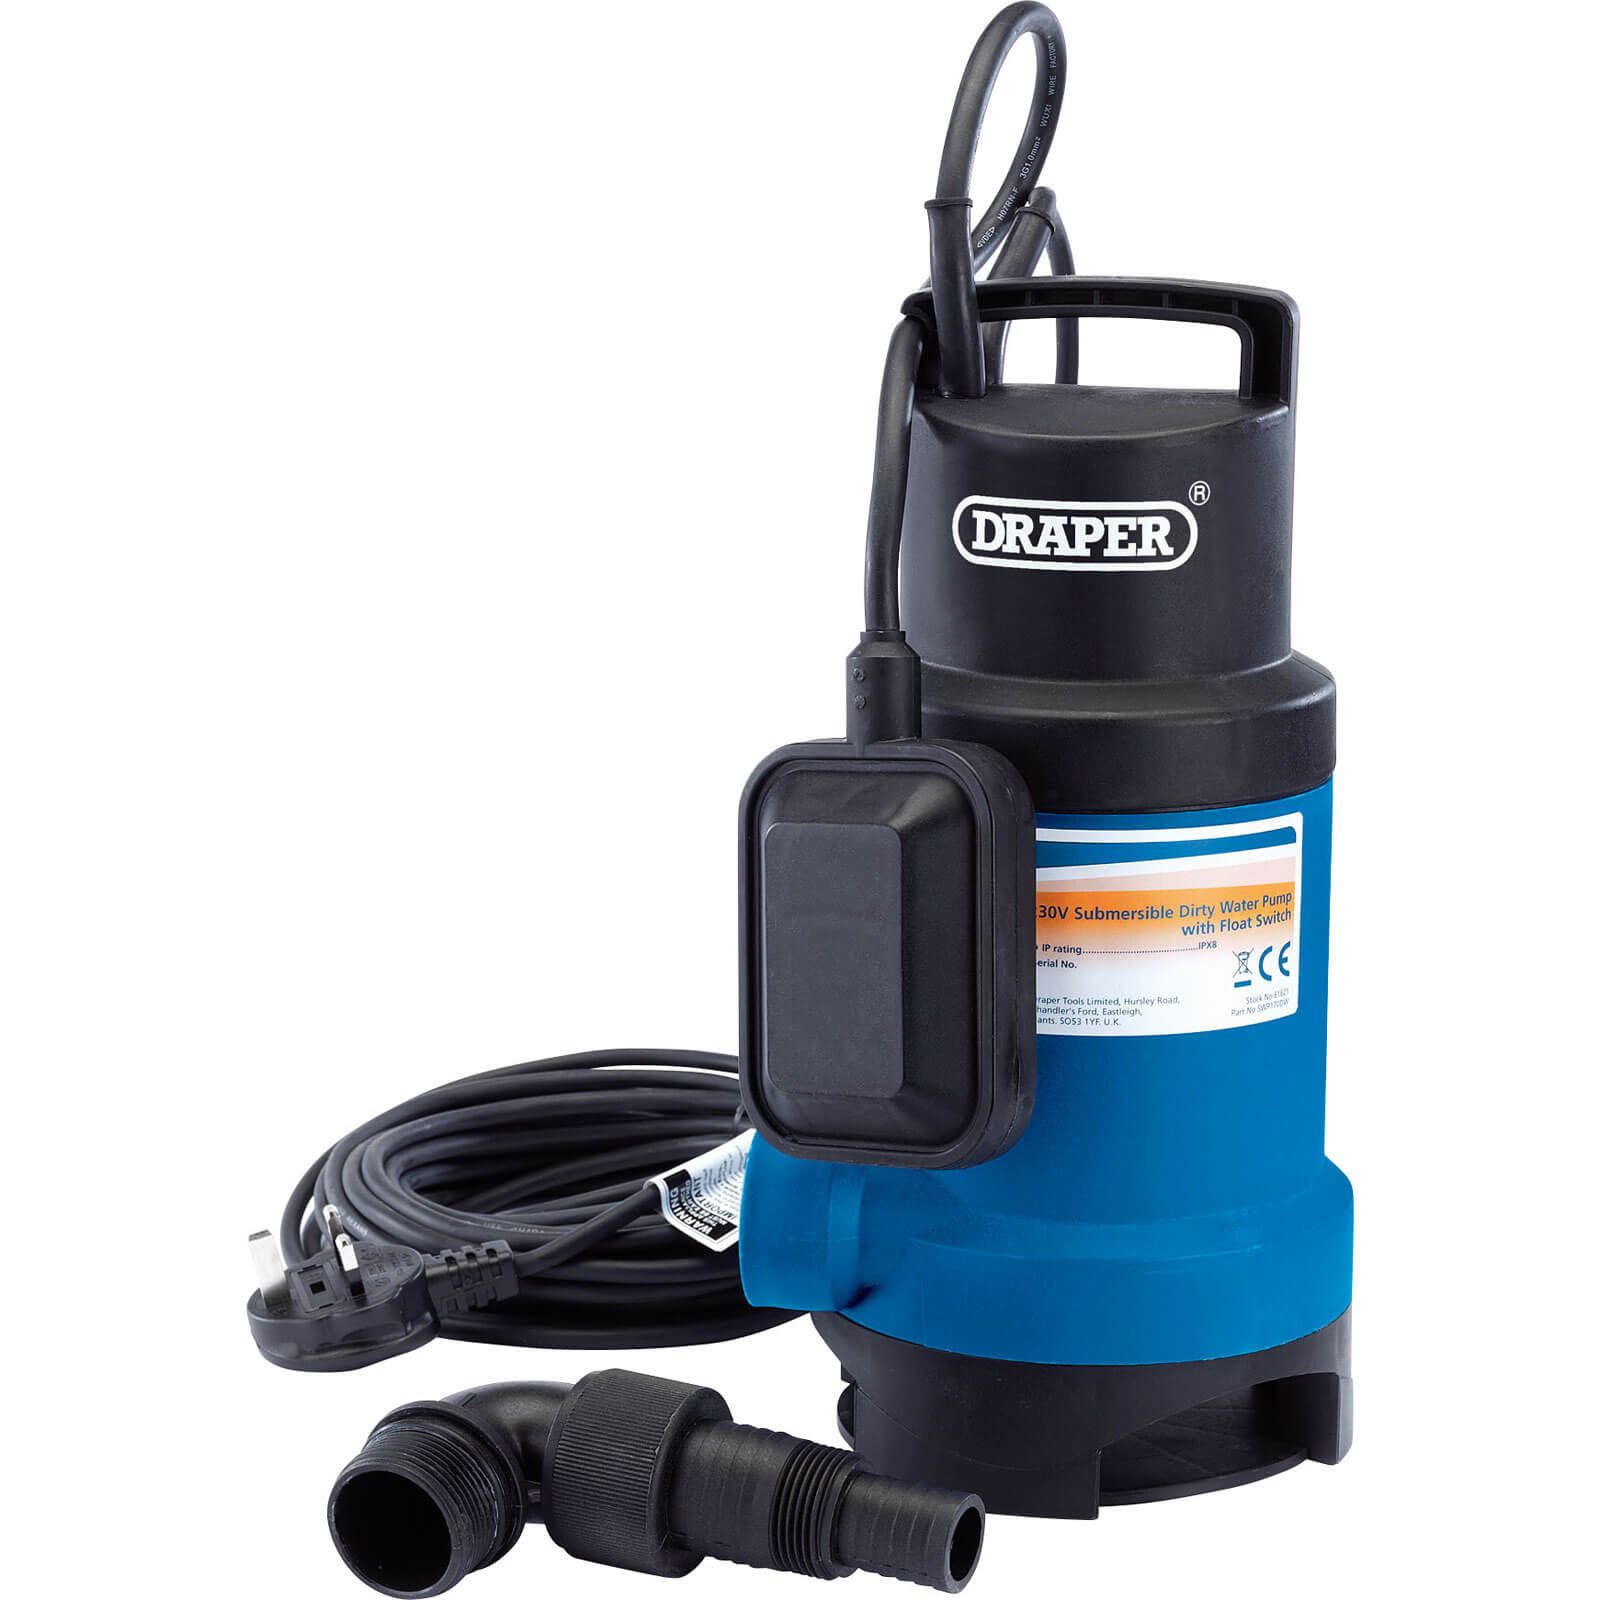 Photo of Draper Swp170dw Submersible Dirty Water Pump 240v